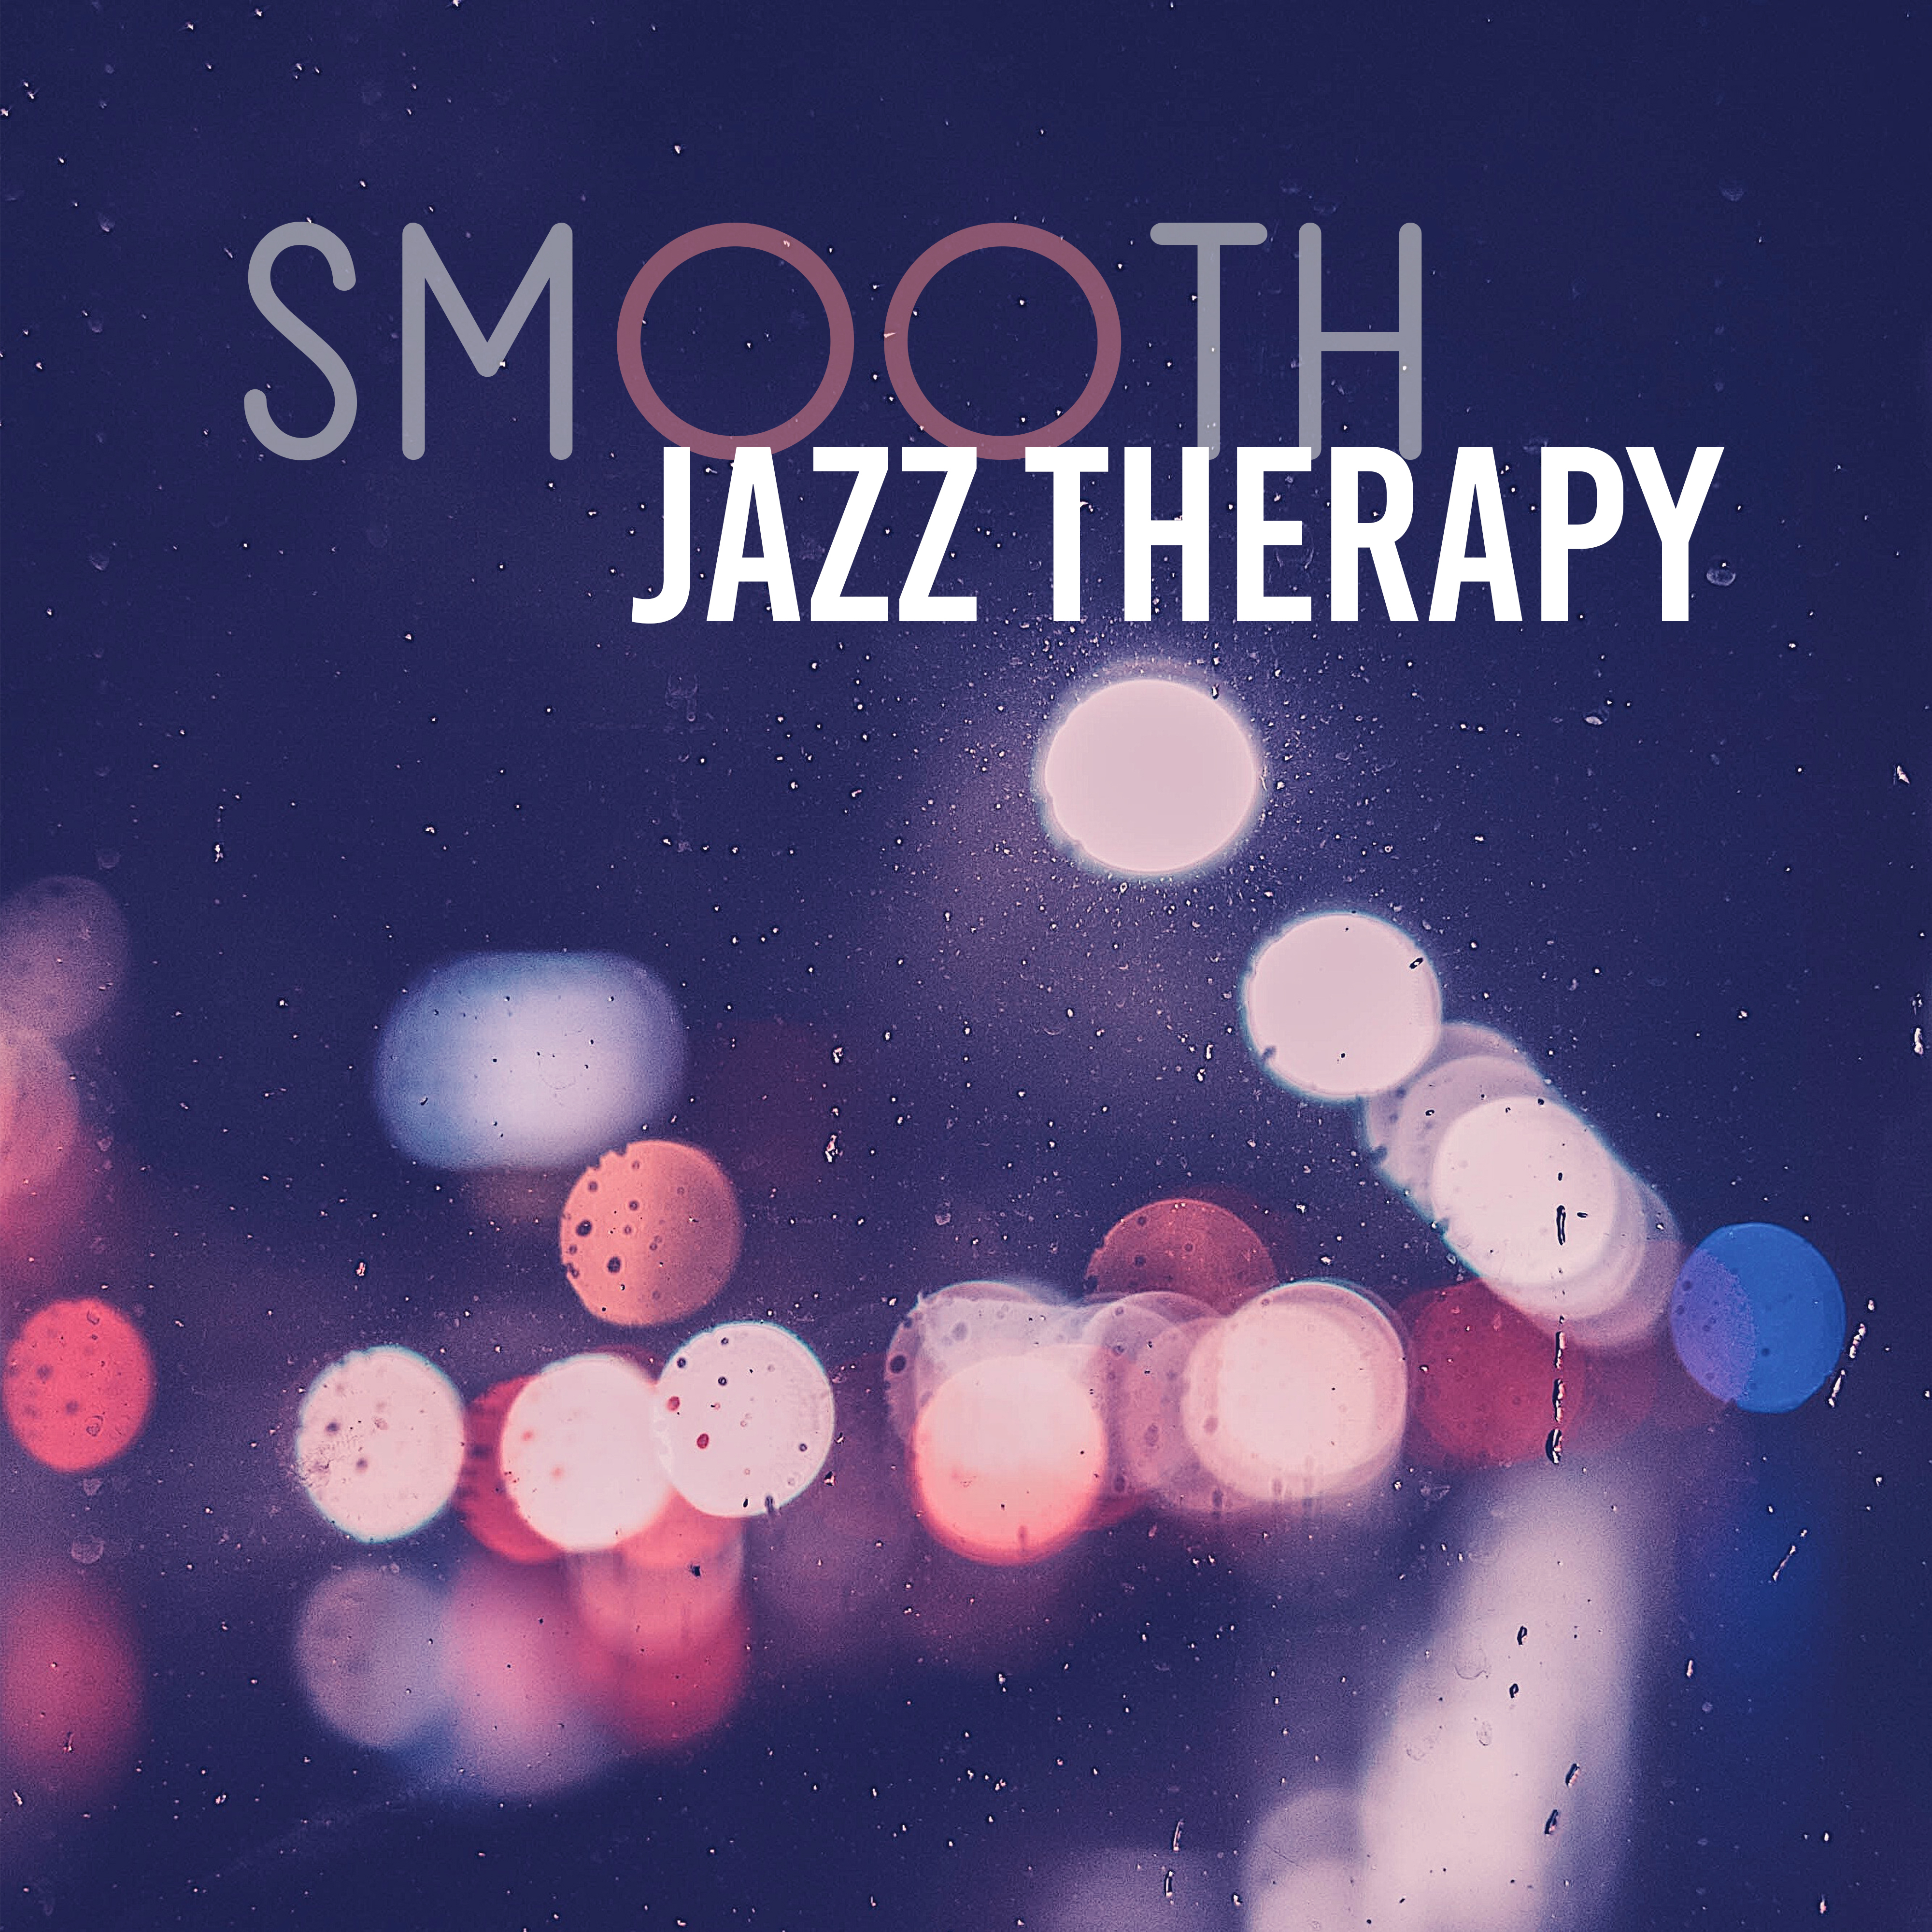 Smooth Jazz Therapy